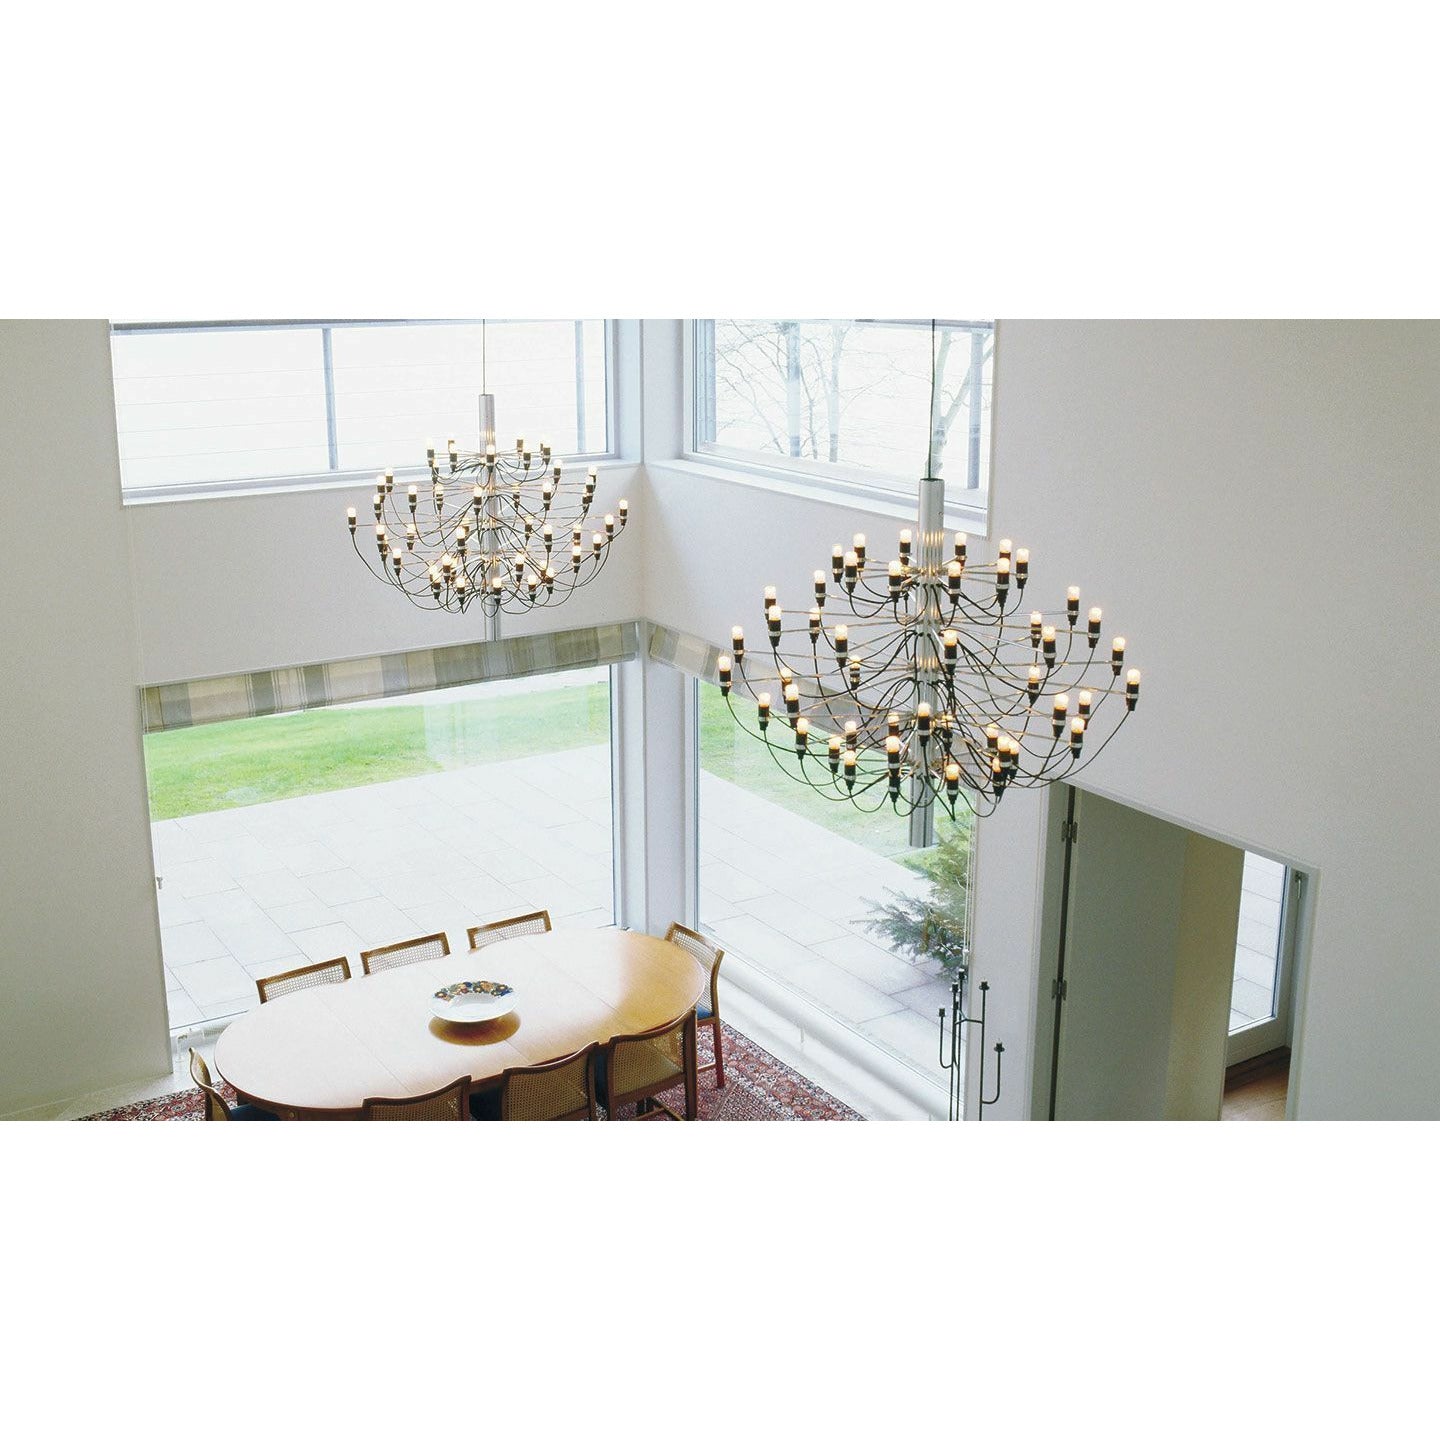 Flos 2097/30 Frosted Chandelier, Chrom